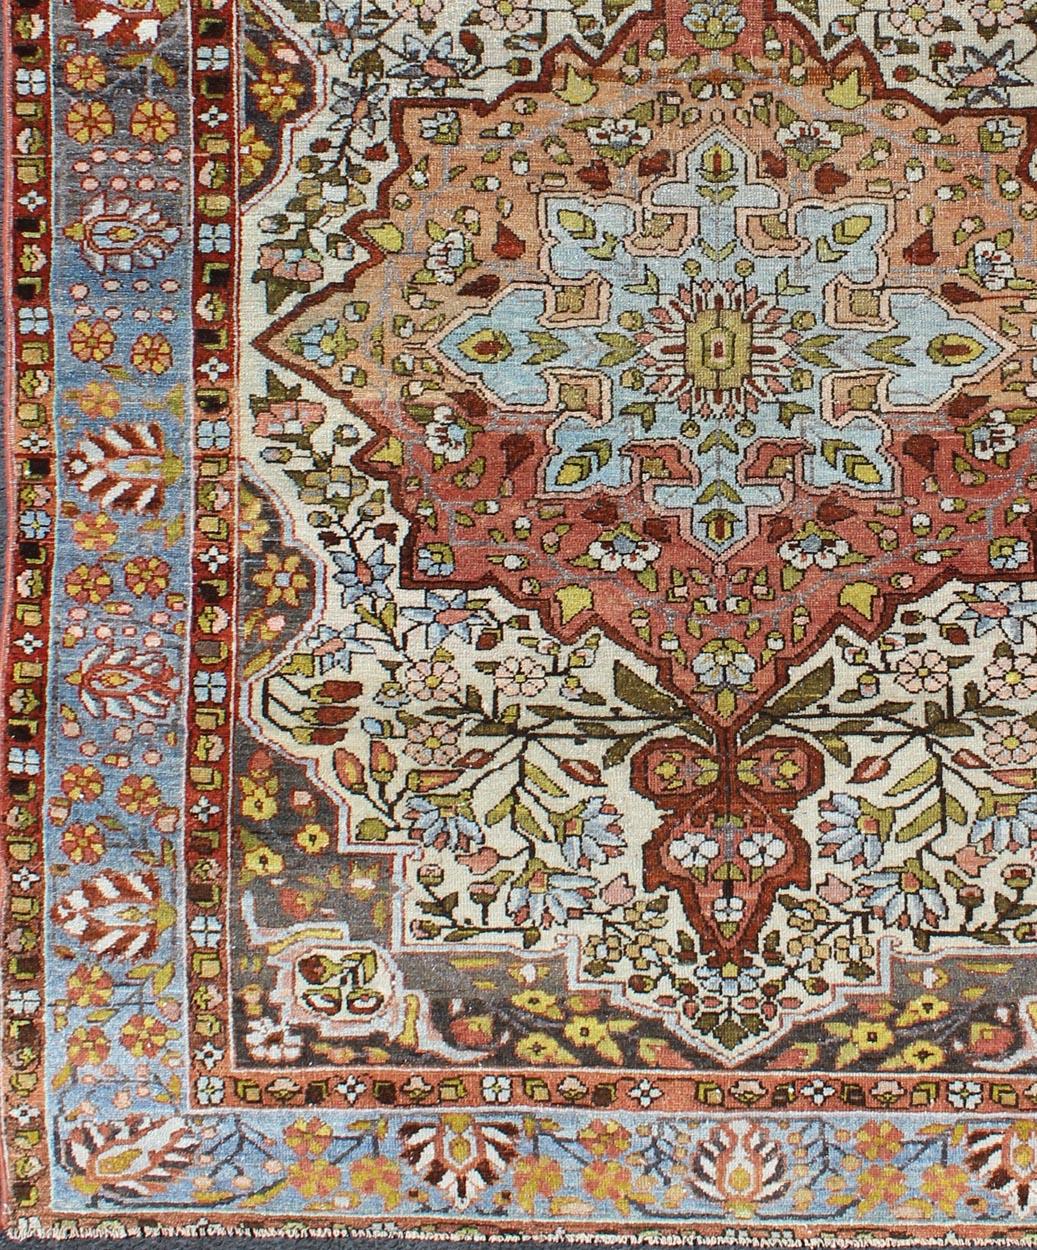 Multi-colors, burnt orange and ivory antique Persian Bakhtiari rug with floral medallion, rug gng-4757, country of origin / type: Iran / Bakhtiari, circa 1930s.

This antique multicolored Persian Bakhtiari rug from early 20th century Iran features a